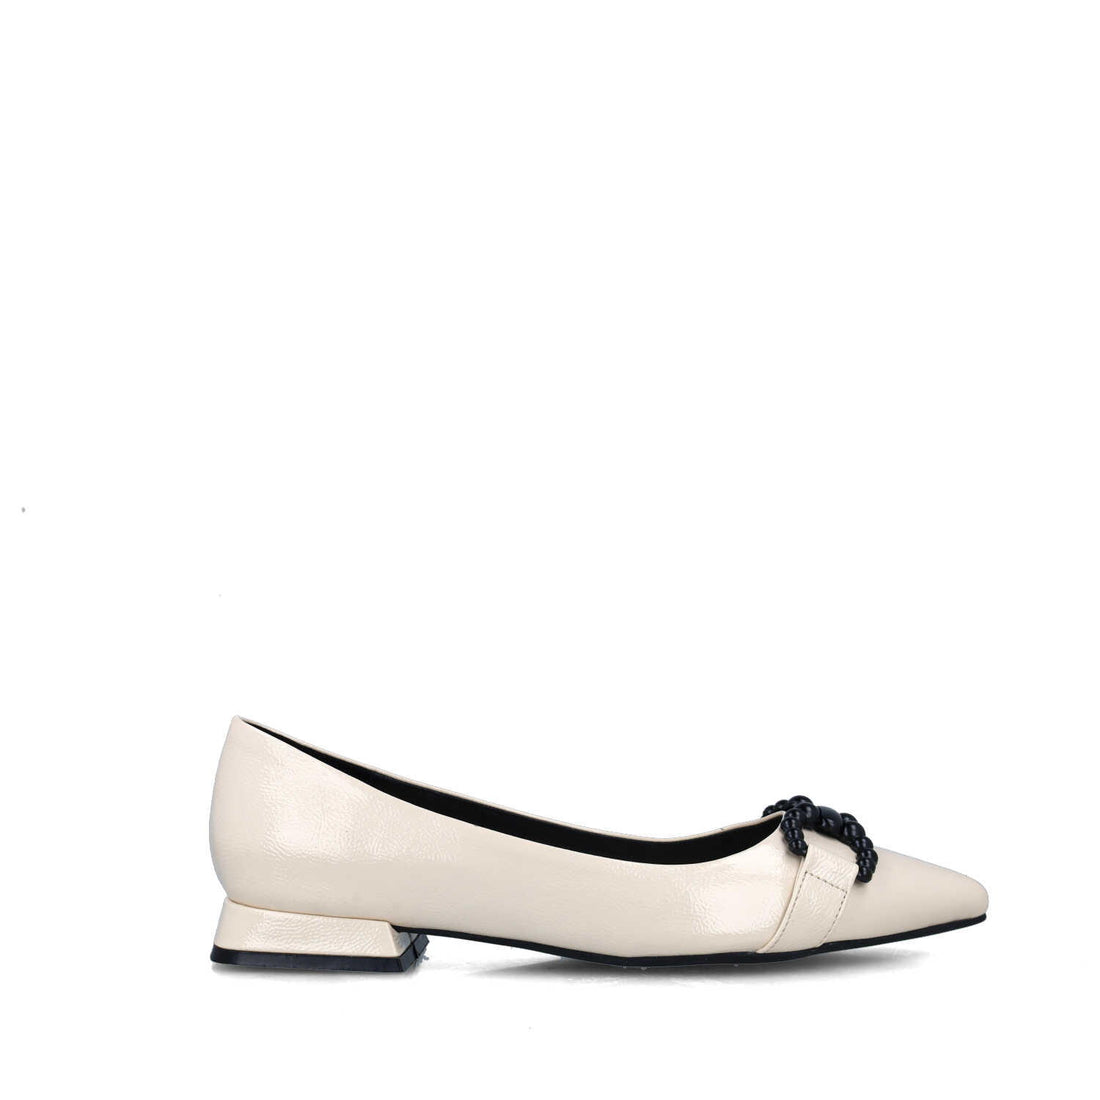 White Flats With Buckle_25308_06_01